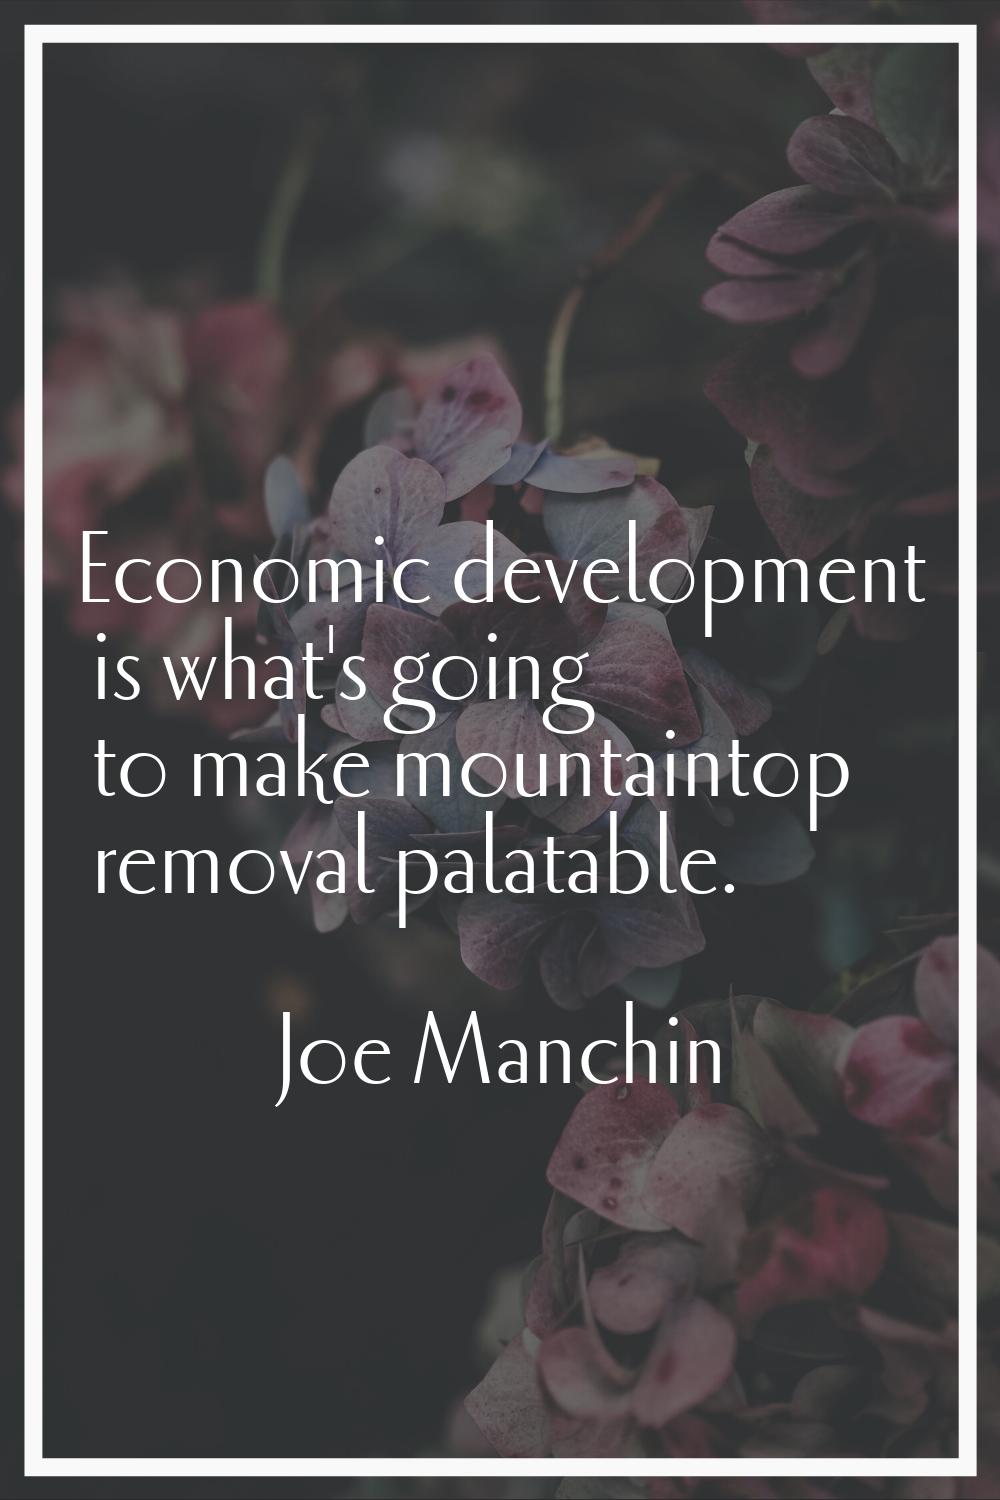 Economic development is what's going to make mountaintop removal palatable.